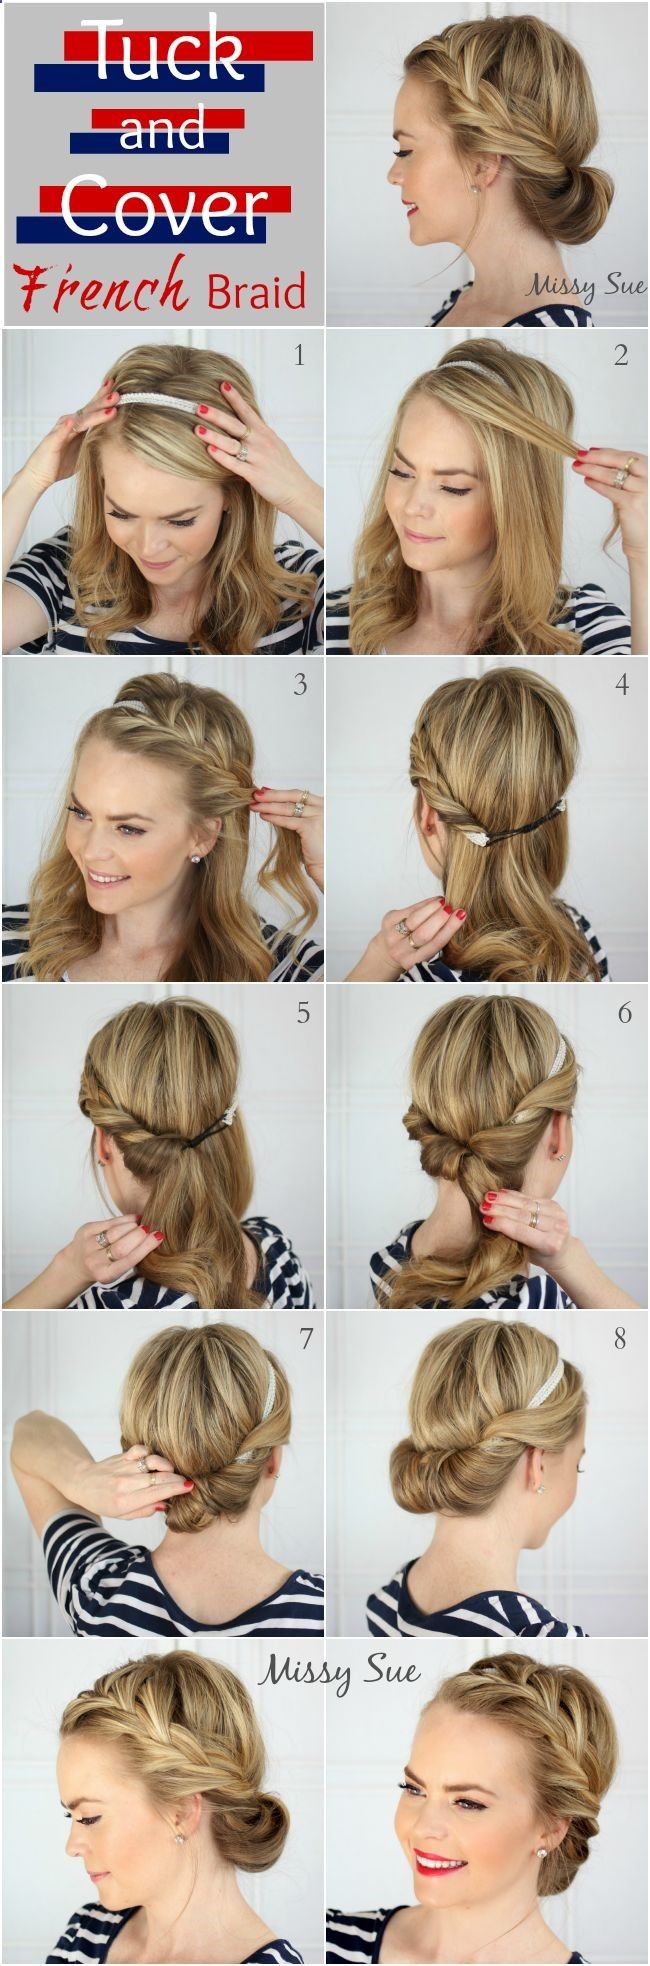 Tuck and Cover French Braid Updo Hairstyle